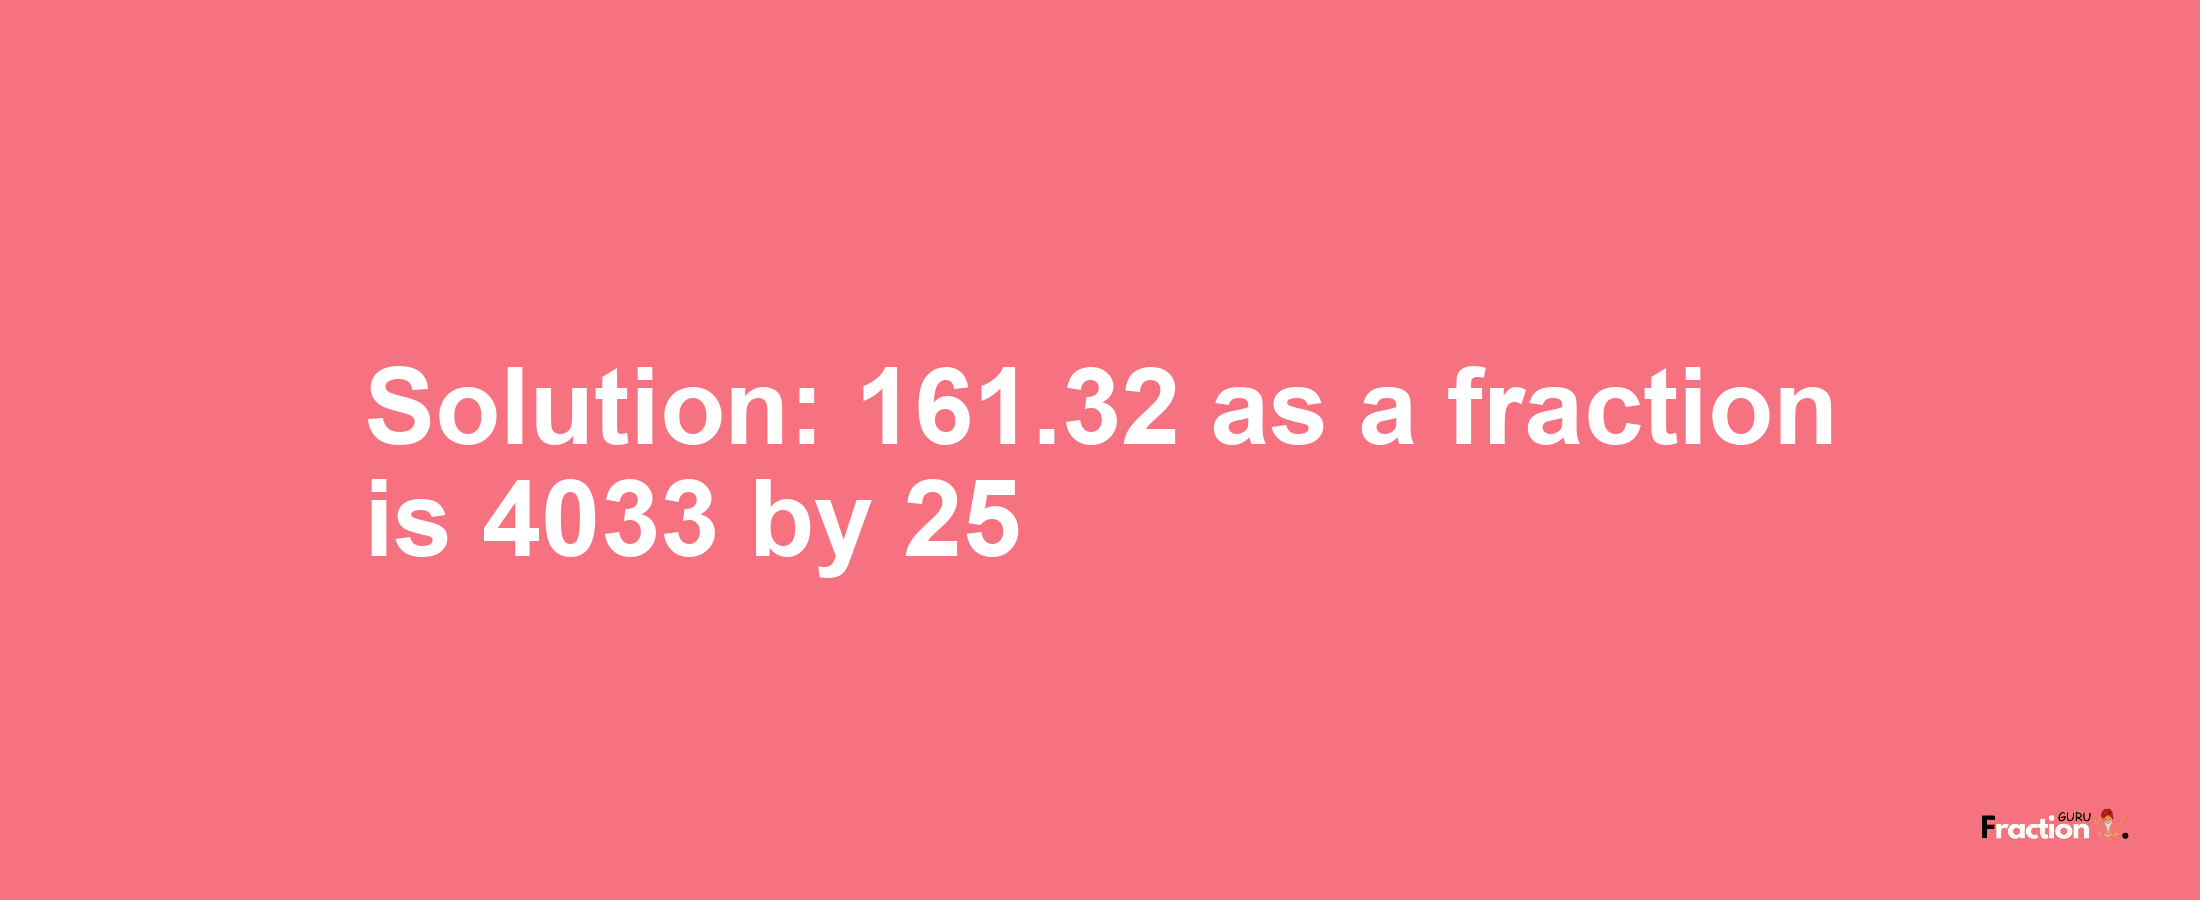 Solution:161.32 as a fraction is 4033/25